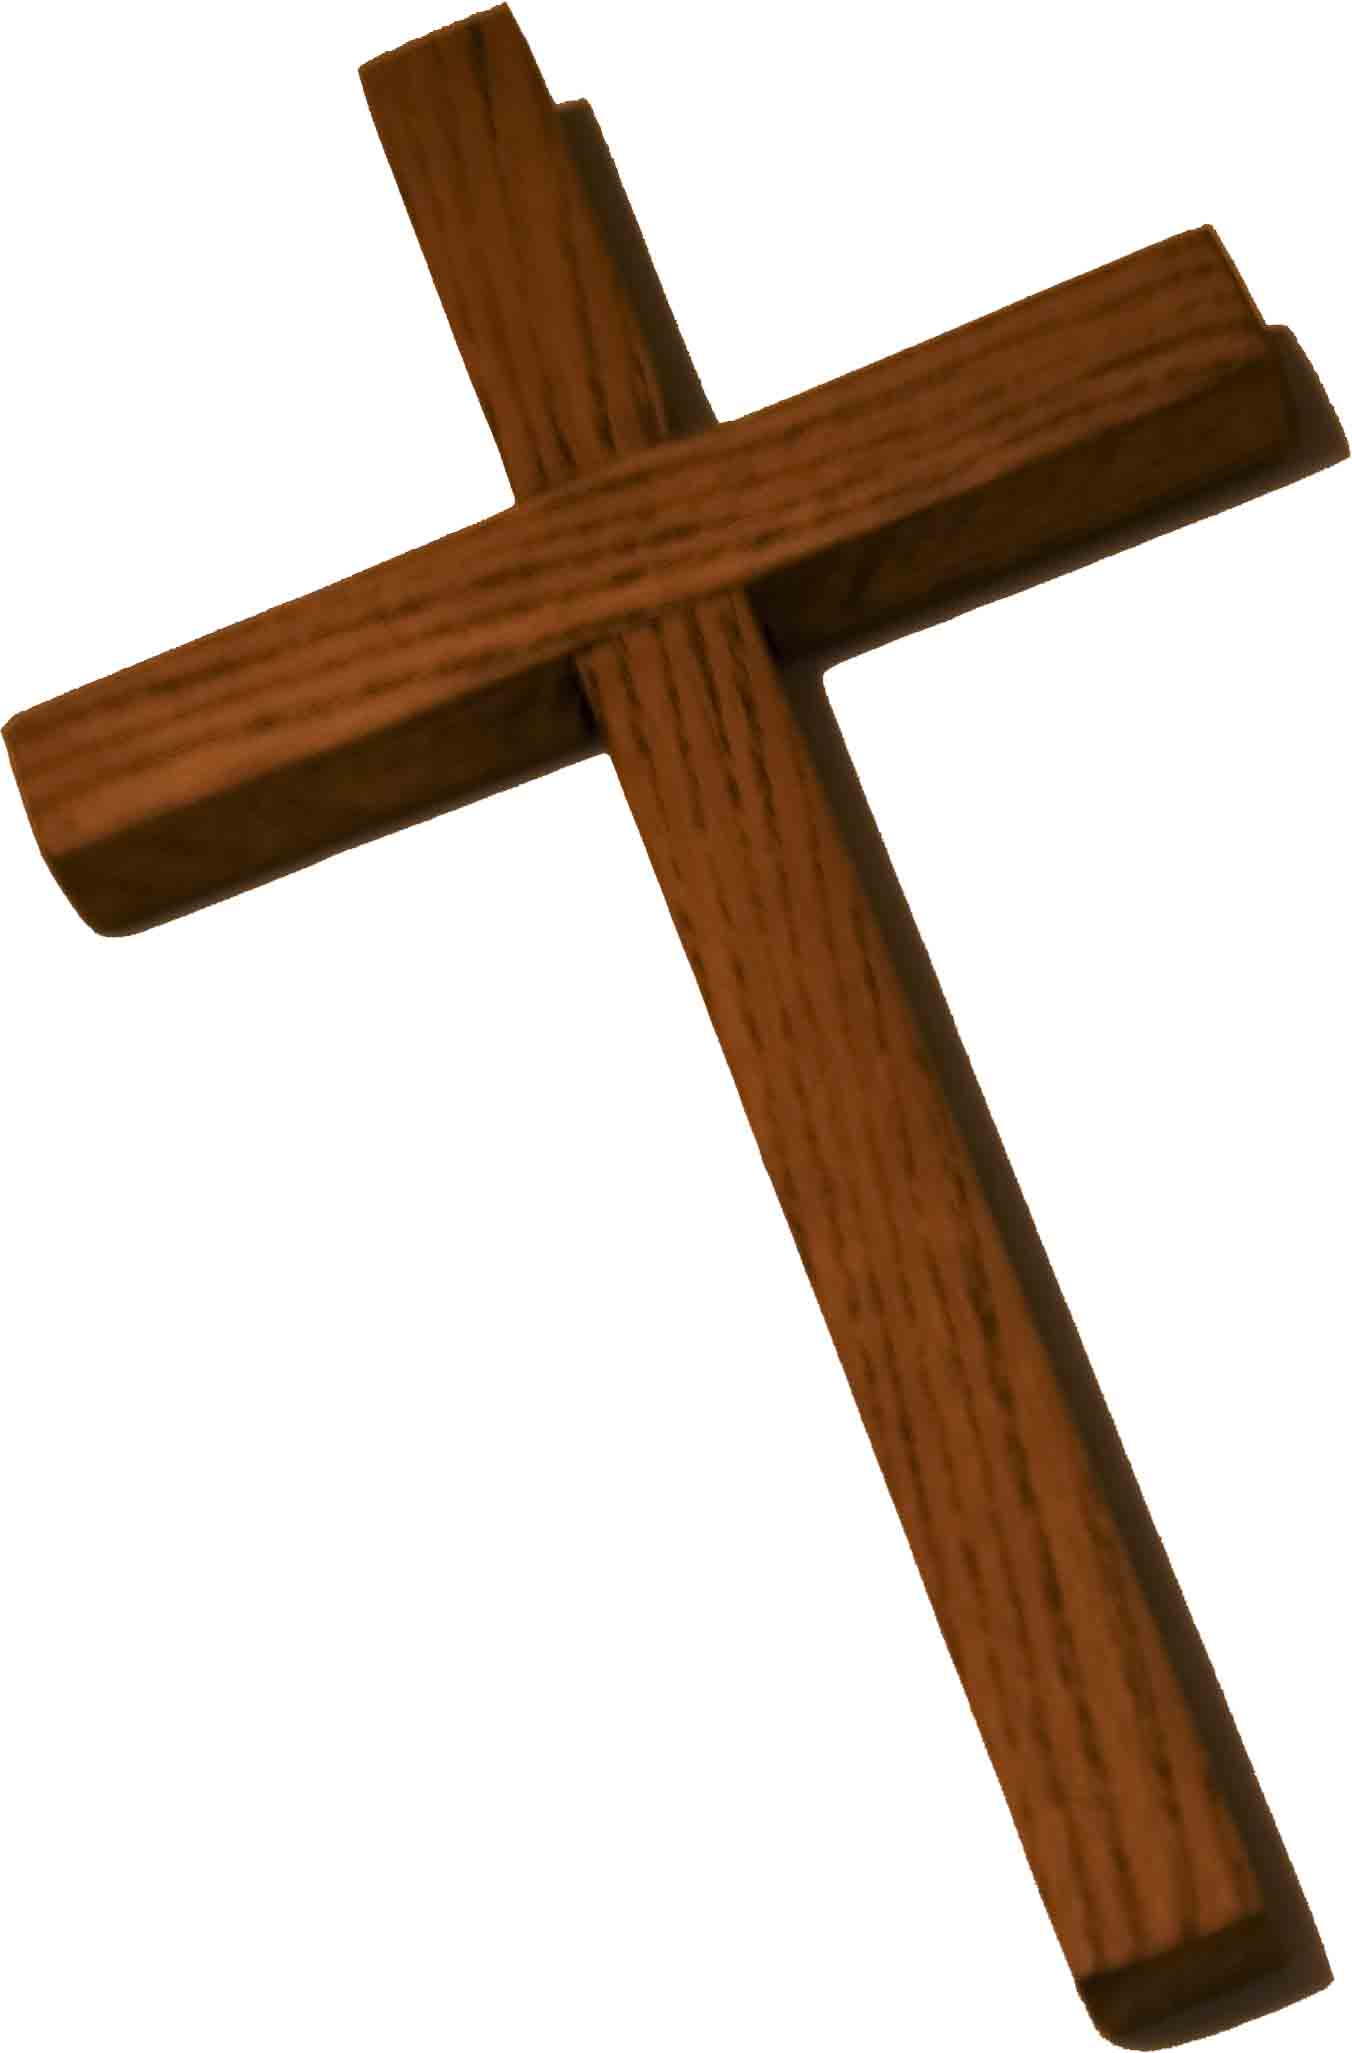 images of the cross